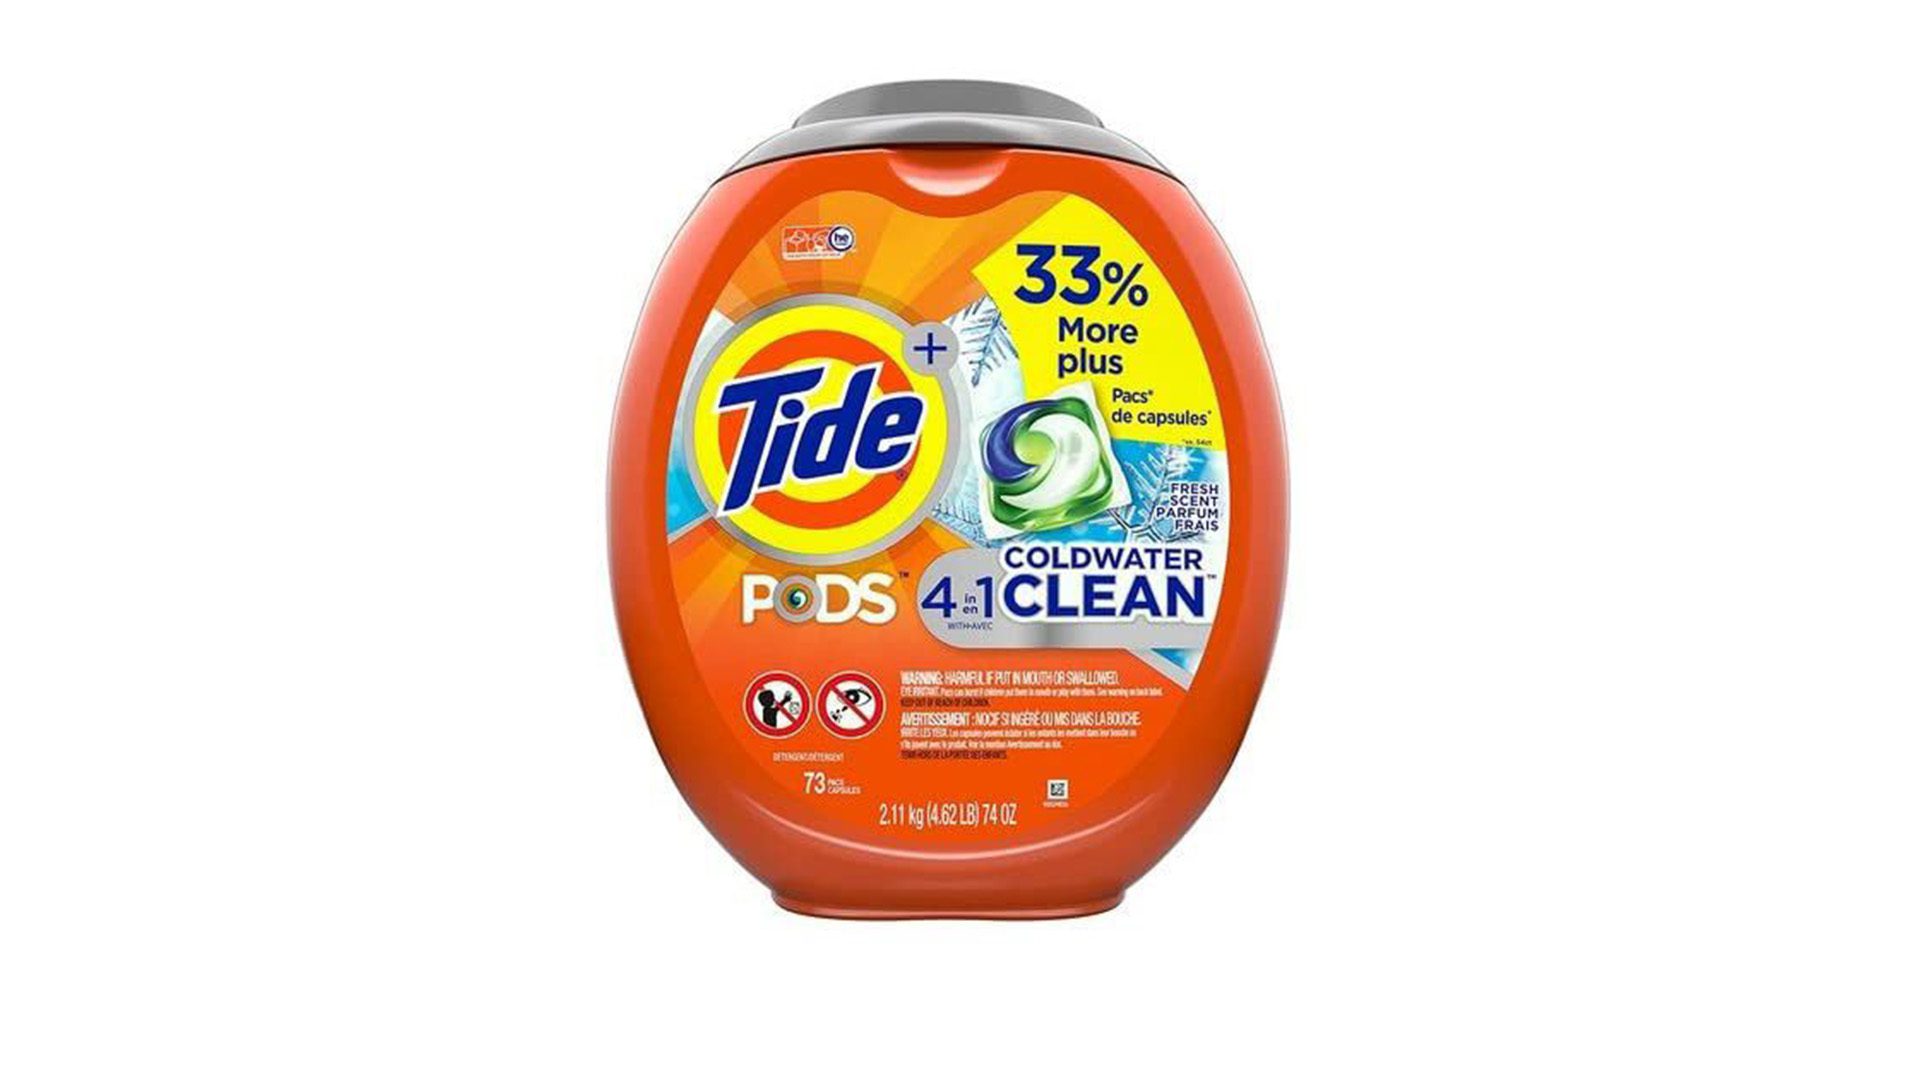 Tide PODS Coldwater Clean is a product that saves water